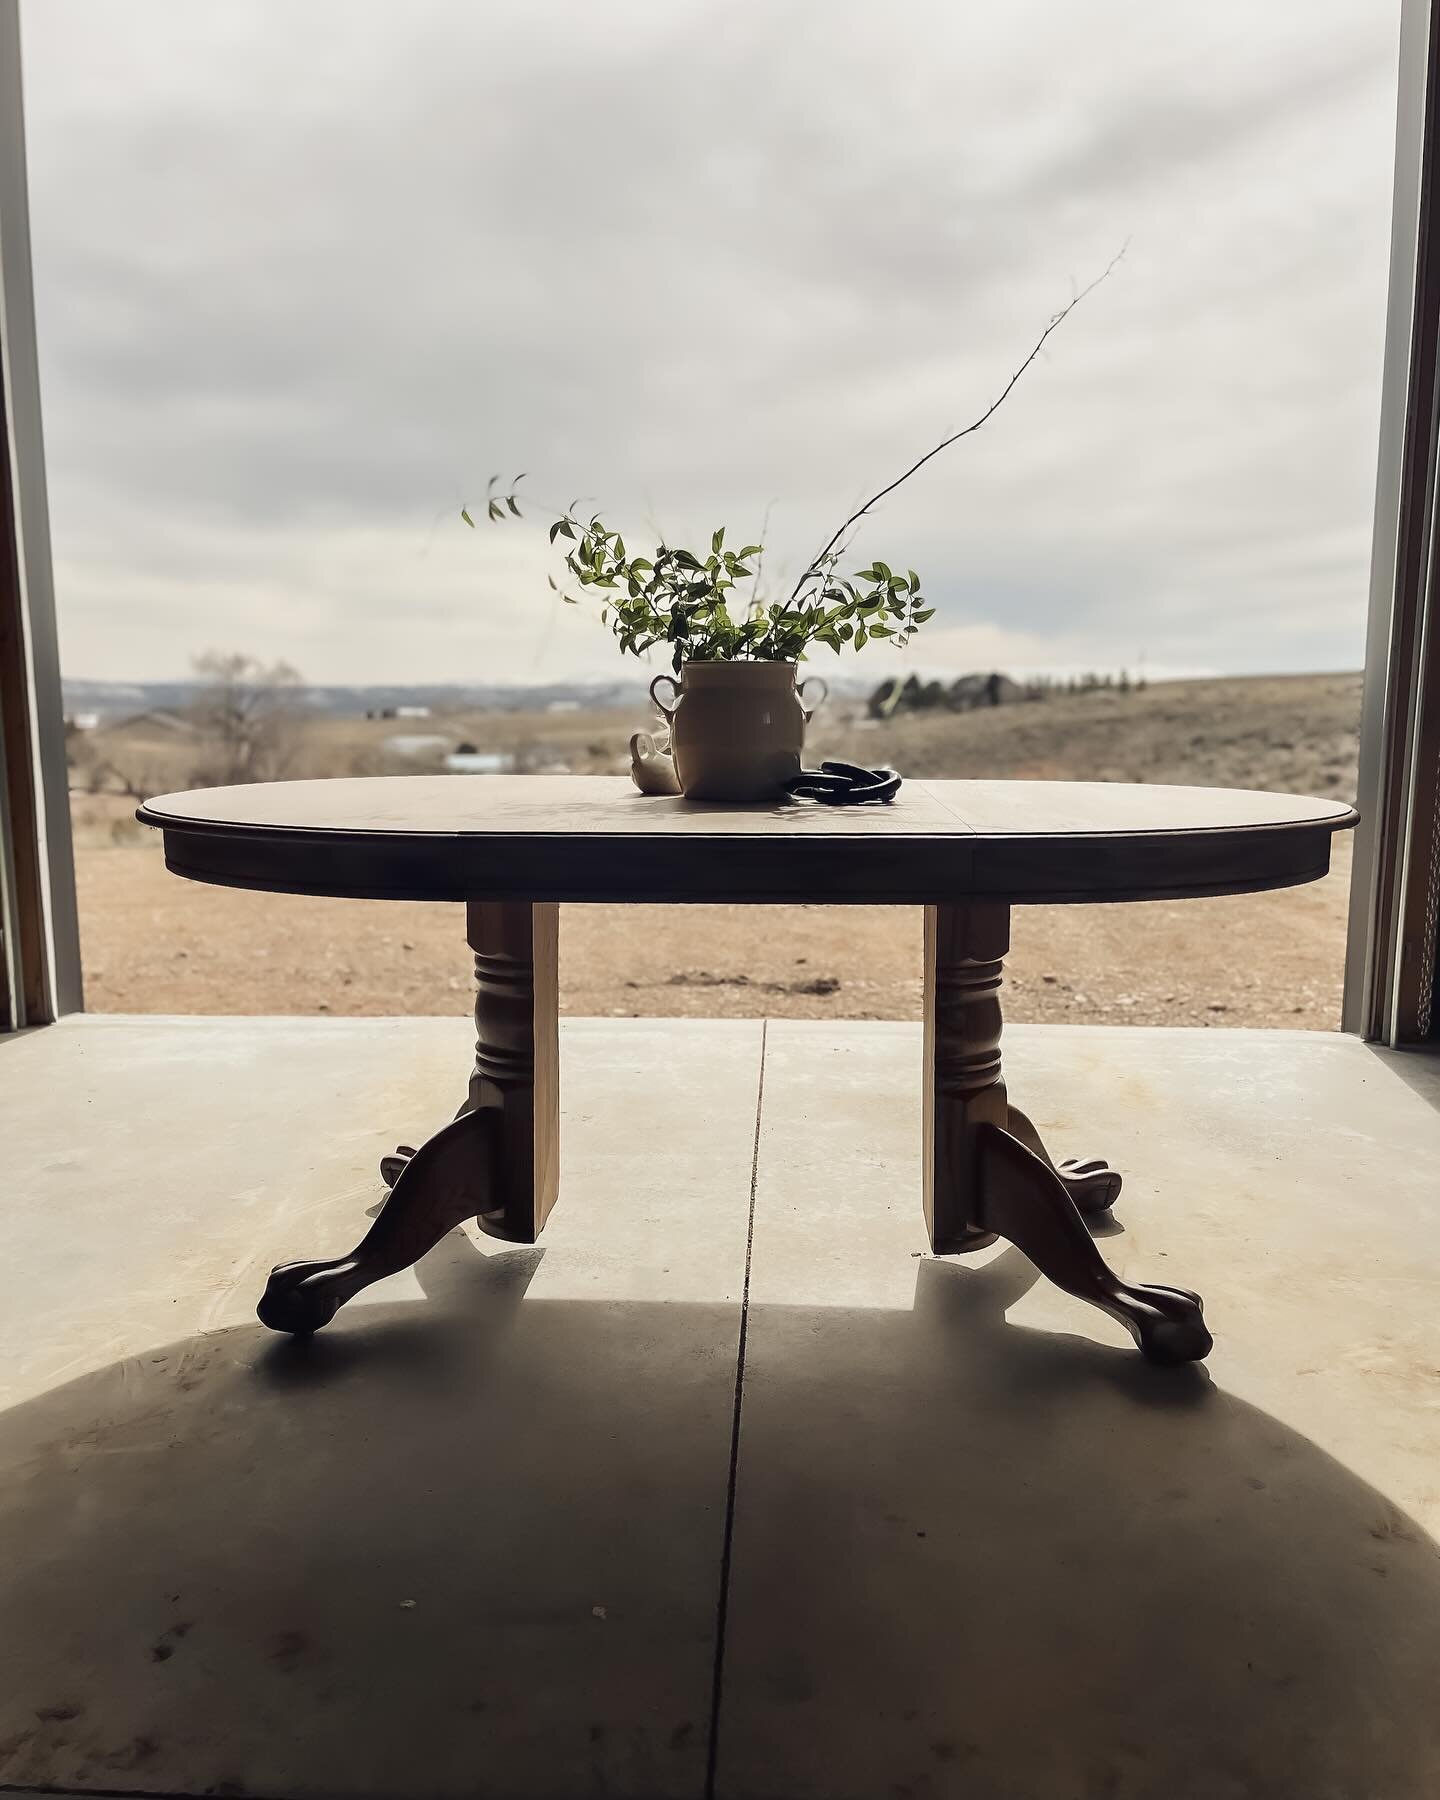 I love a good still photo, almost as much as I love how this table turned out. 

#furnituremakeover #sentimentalpieces #furniture #makethingsbetter